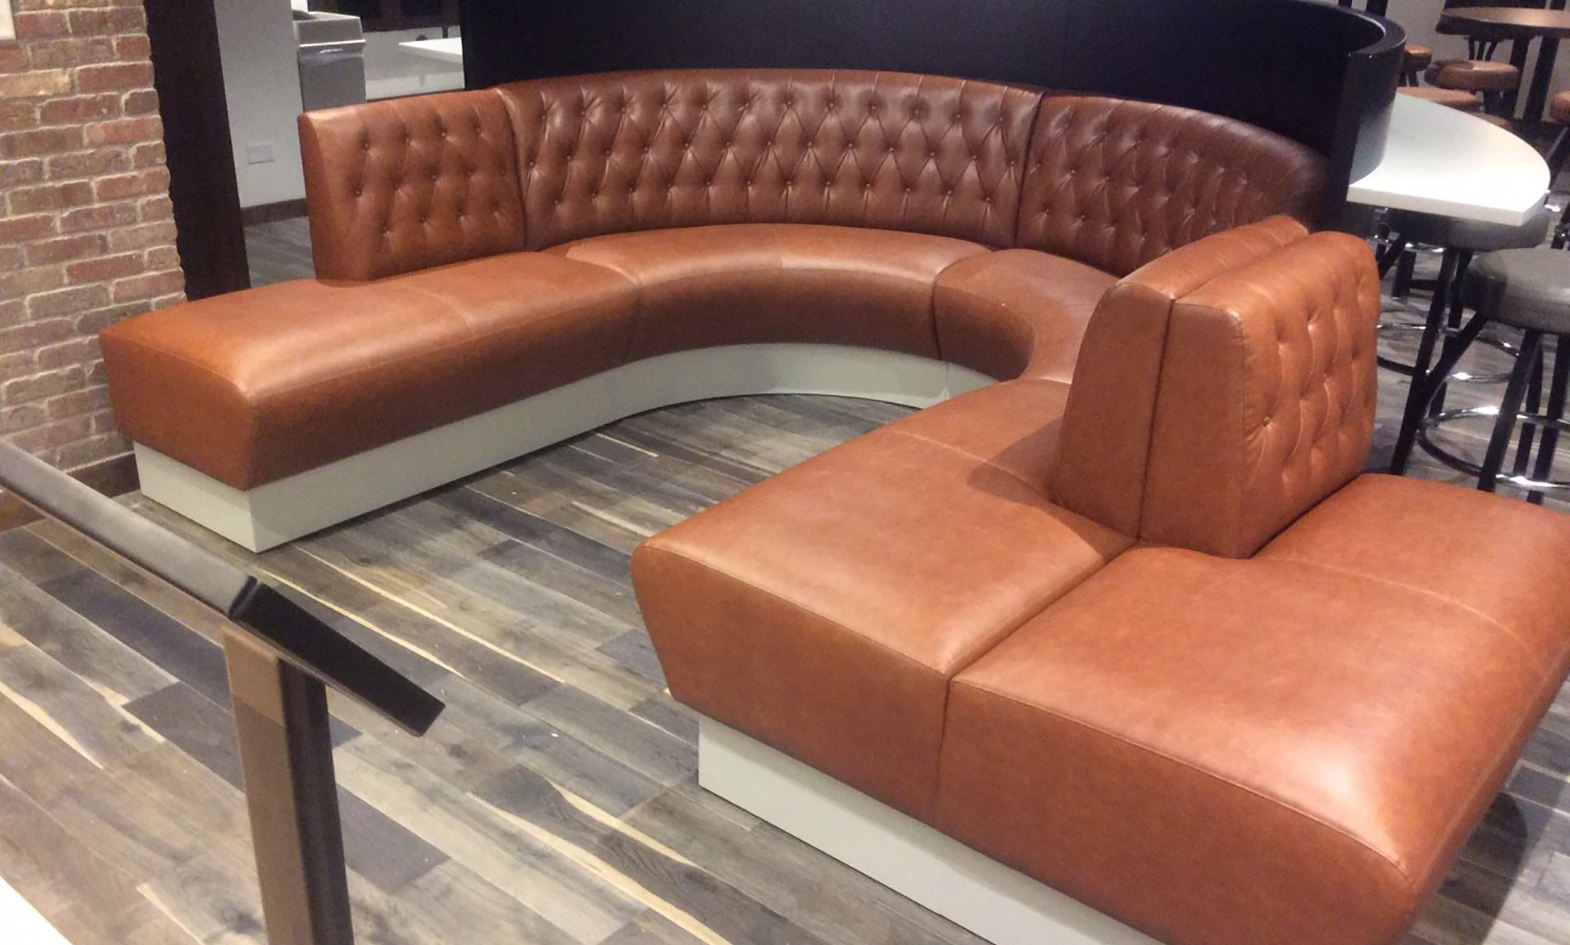 Custom curved banquette seating with bench, wood veneer privacy screen and cantilevered work surface for casino